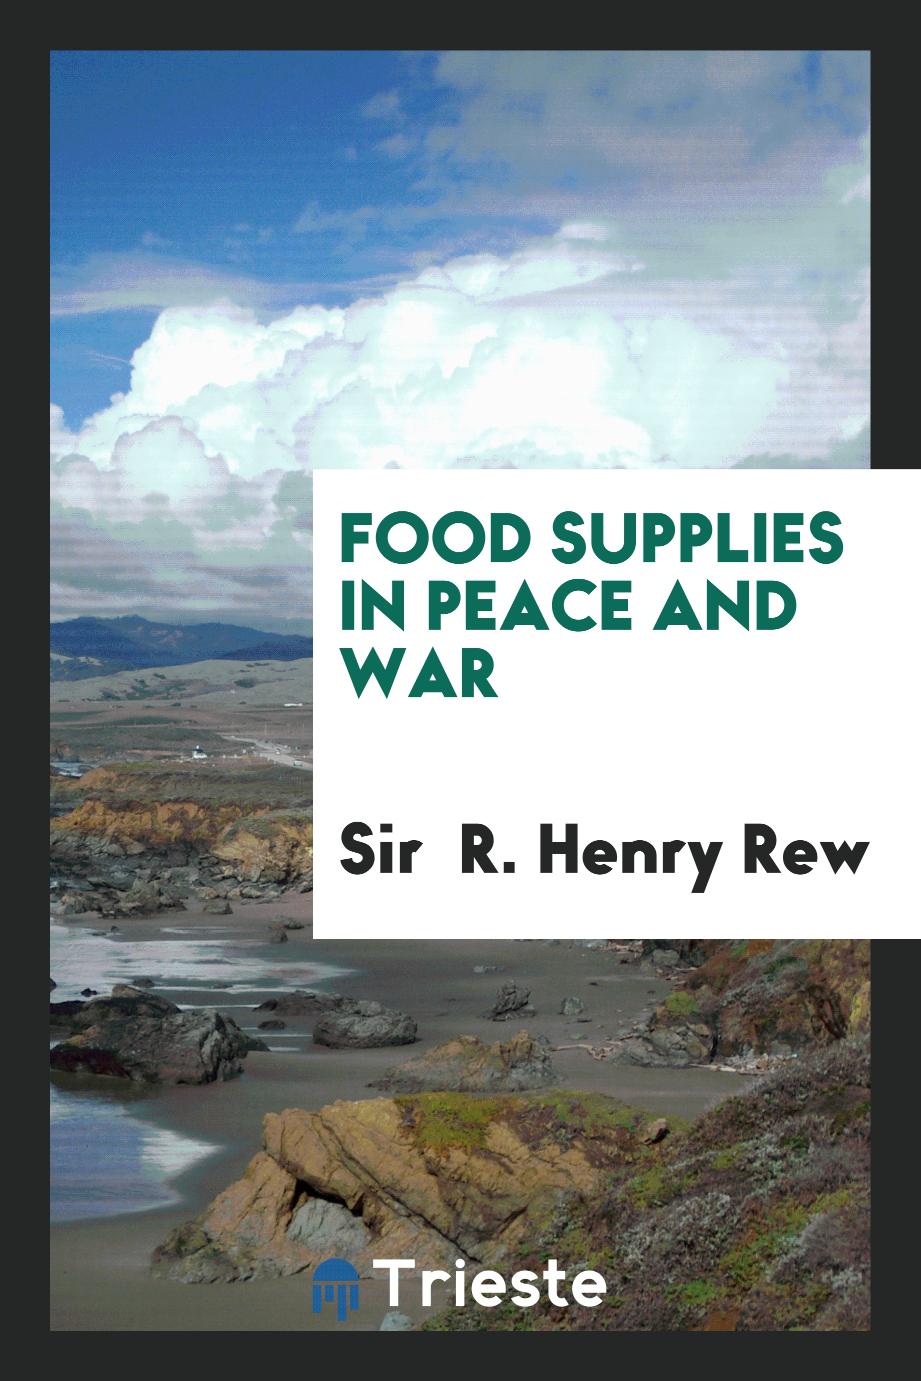 Food supplies in peace and war